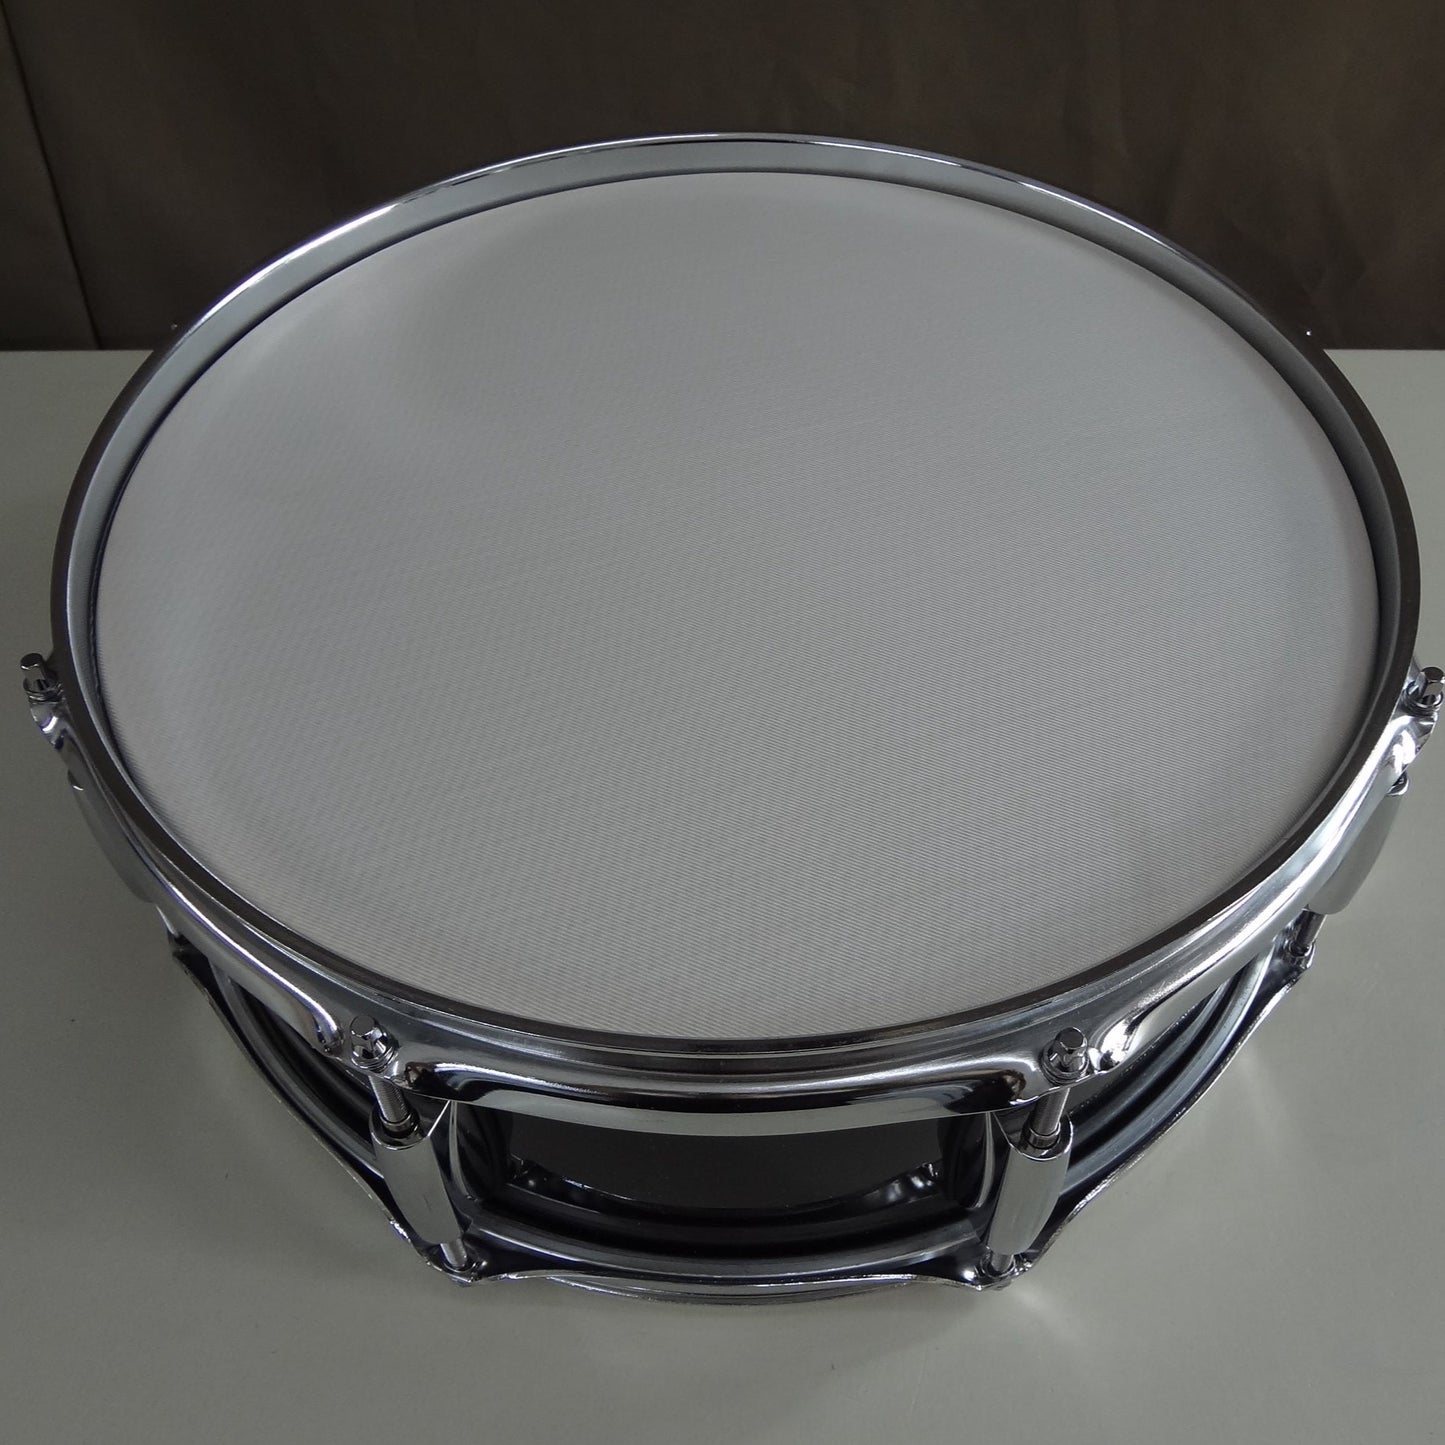 New 14 Inch Custom Electronic Snare Drum - Black Sparkle